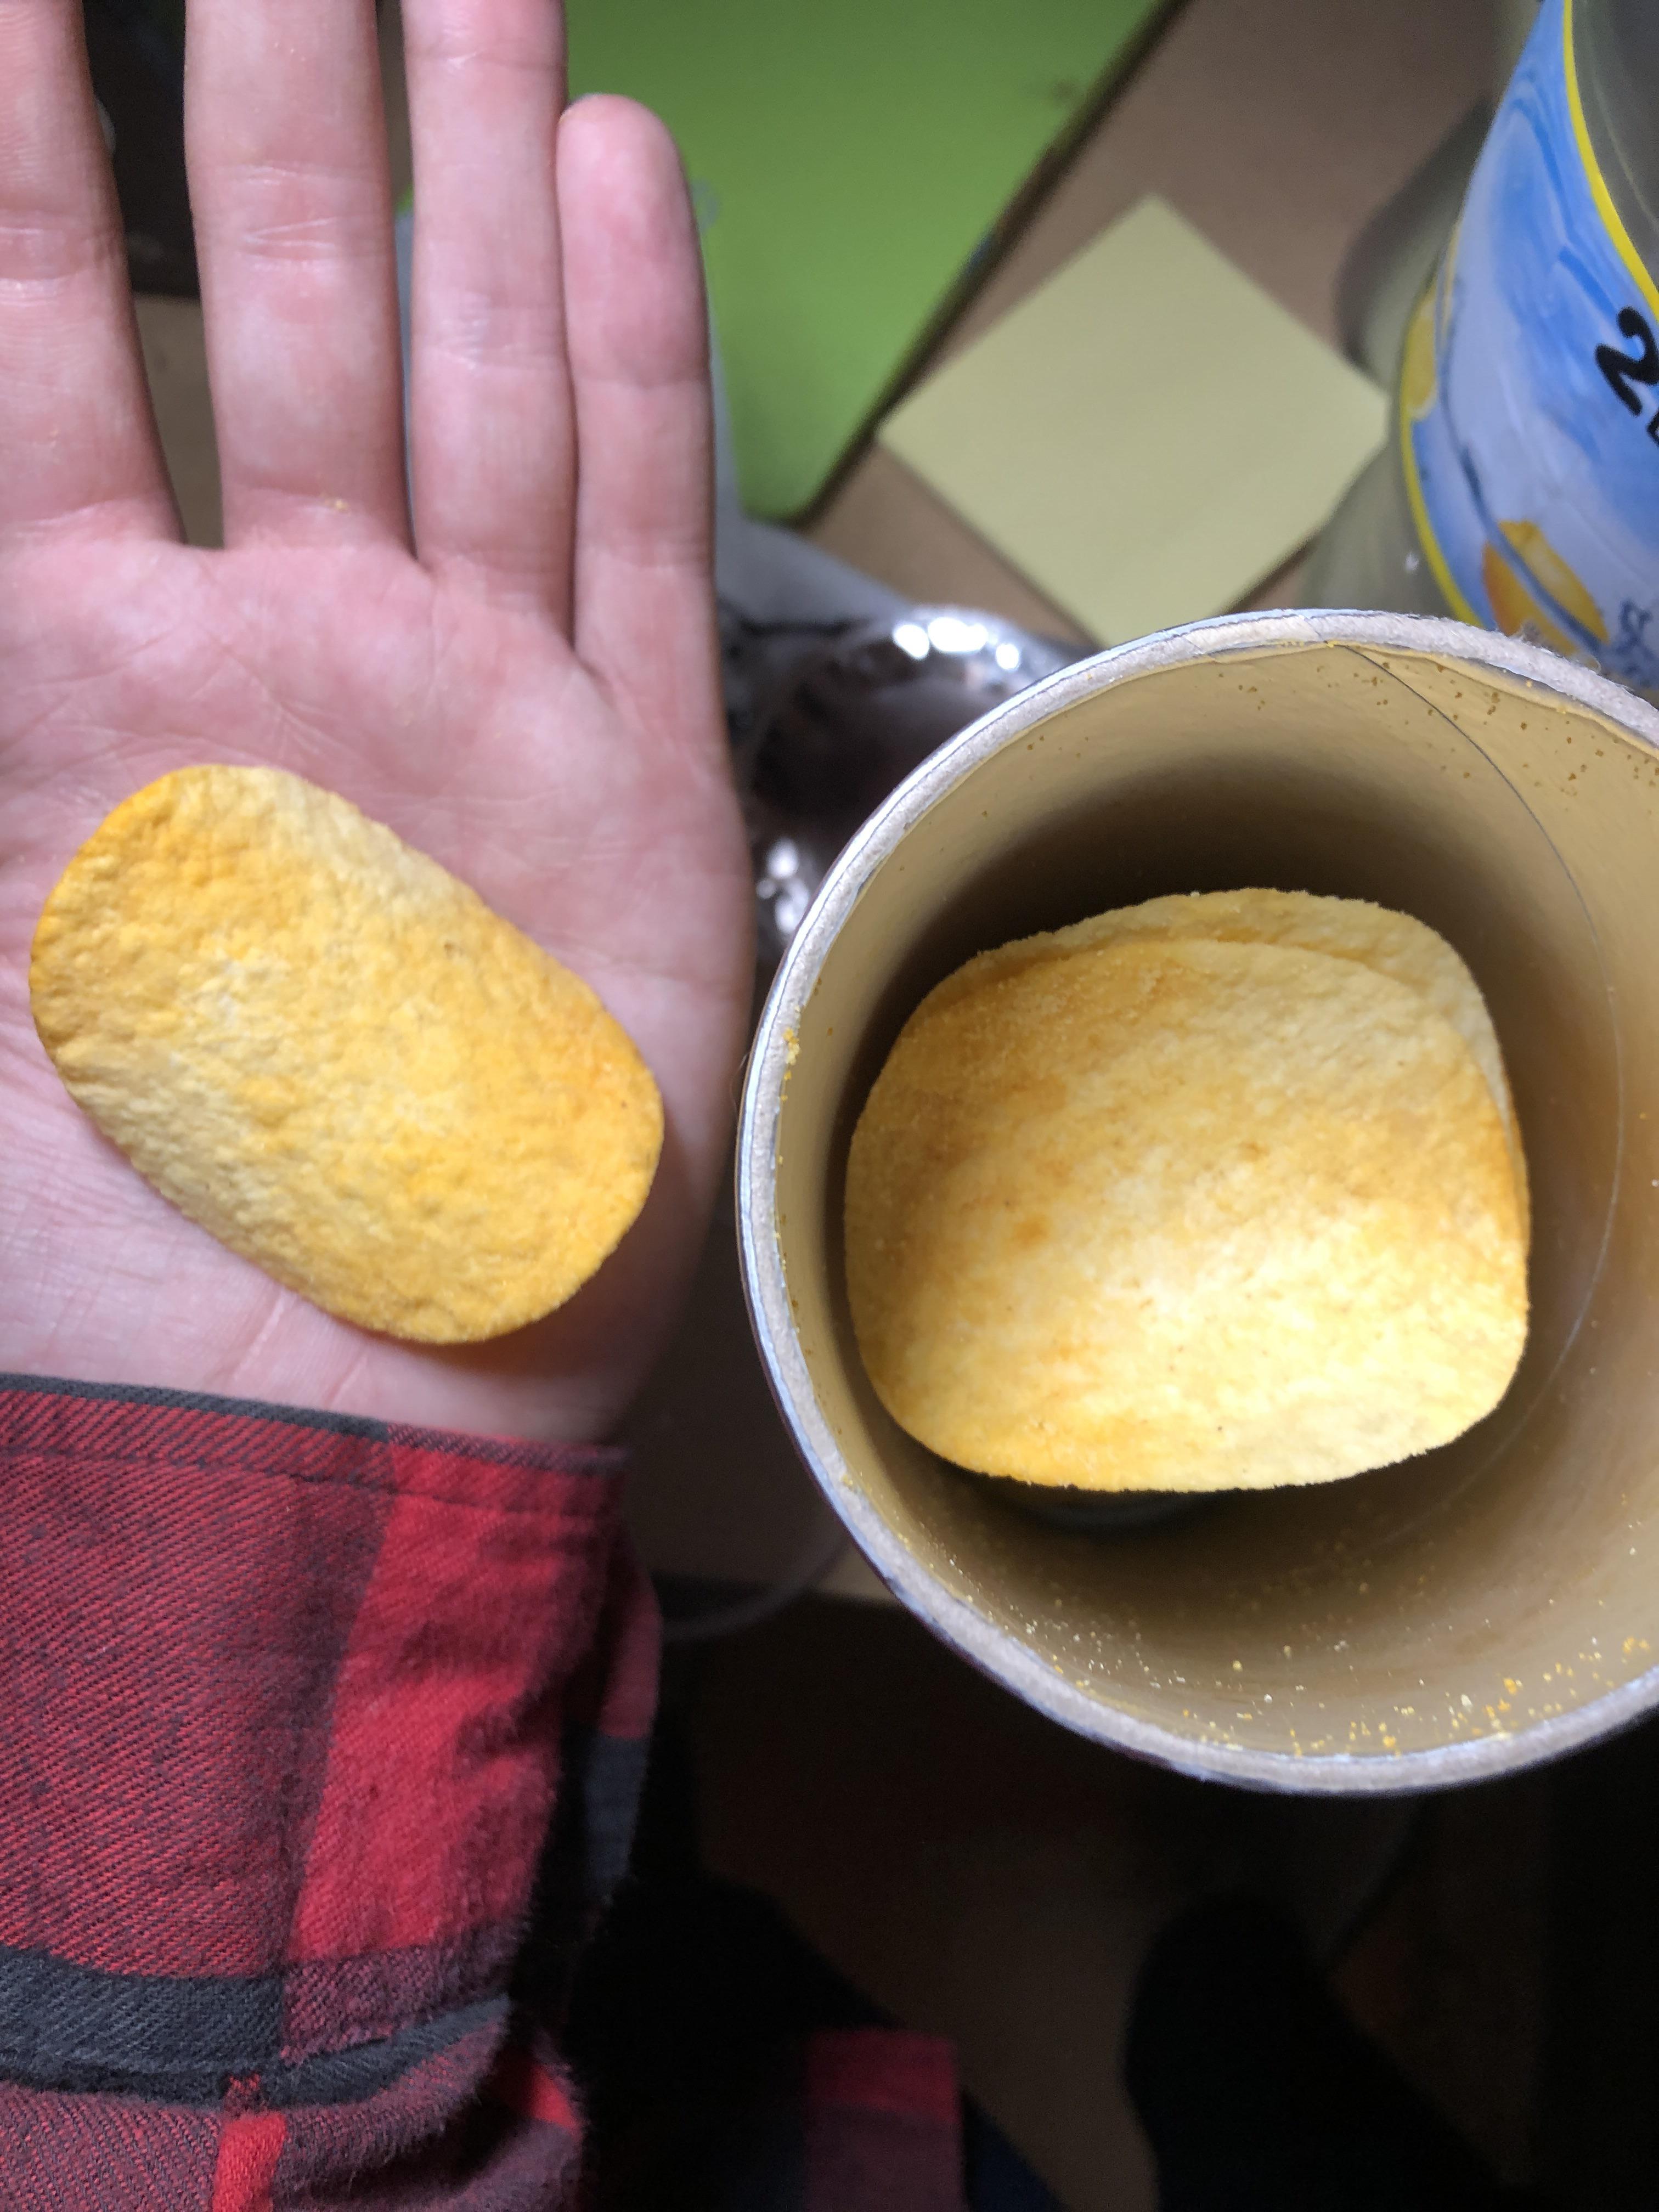 have pringle's gotten smaller? this is a regular sized canister of ...